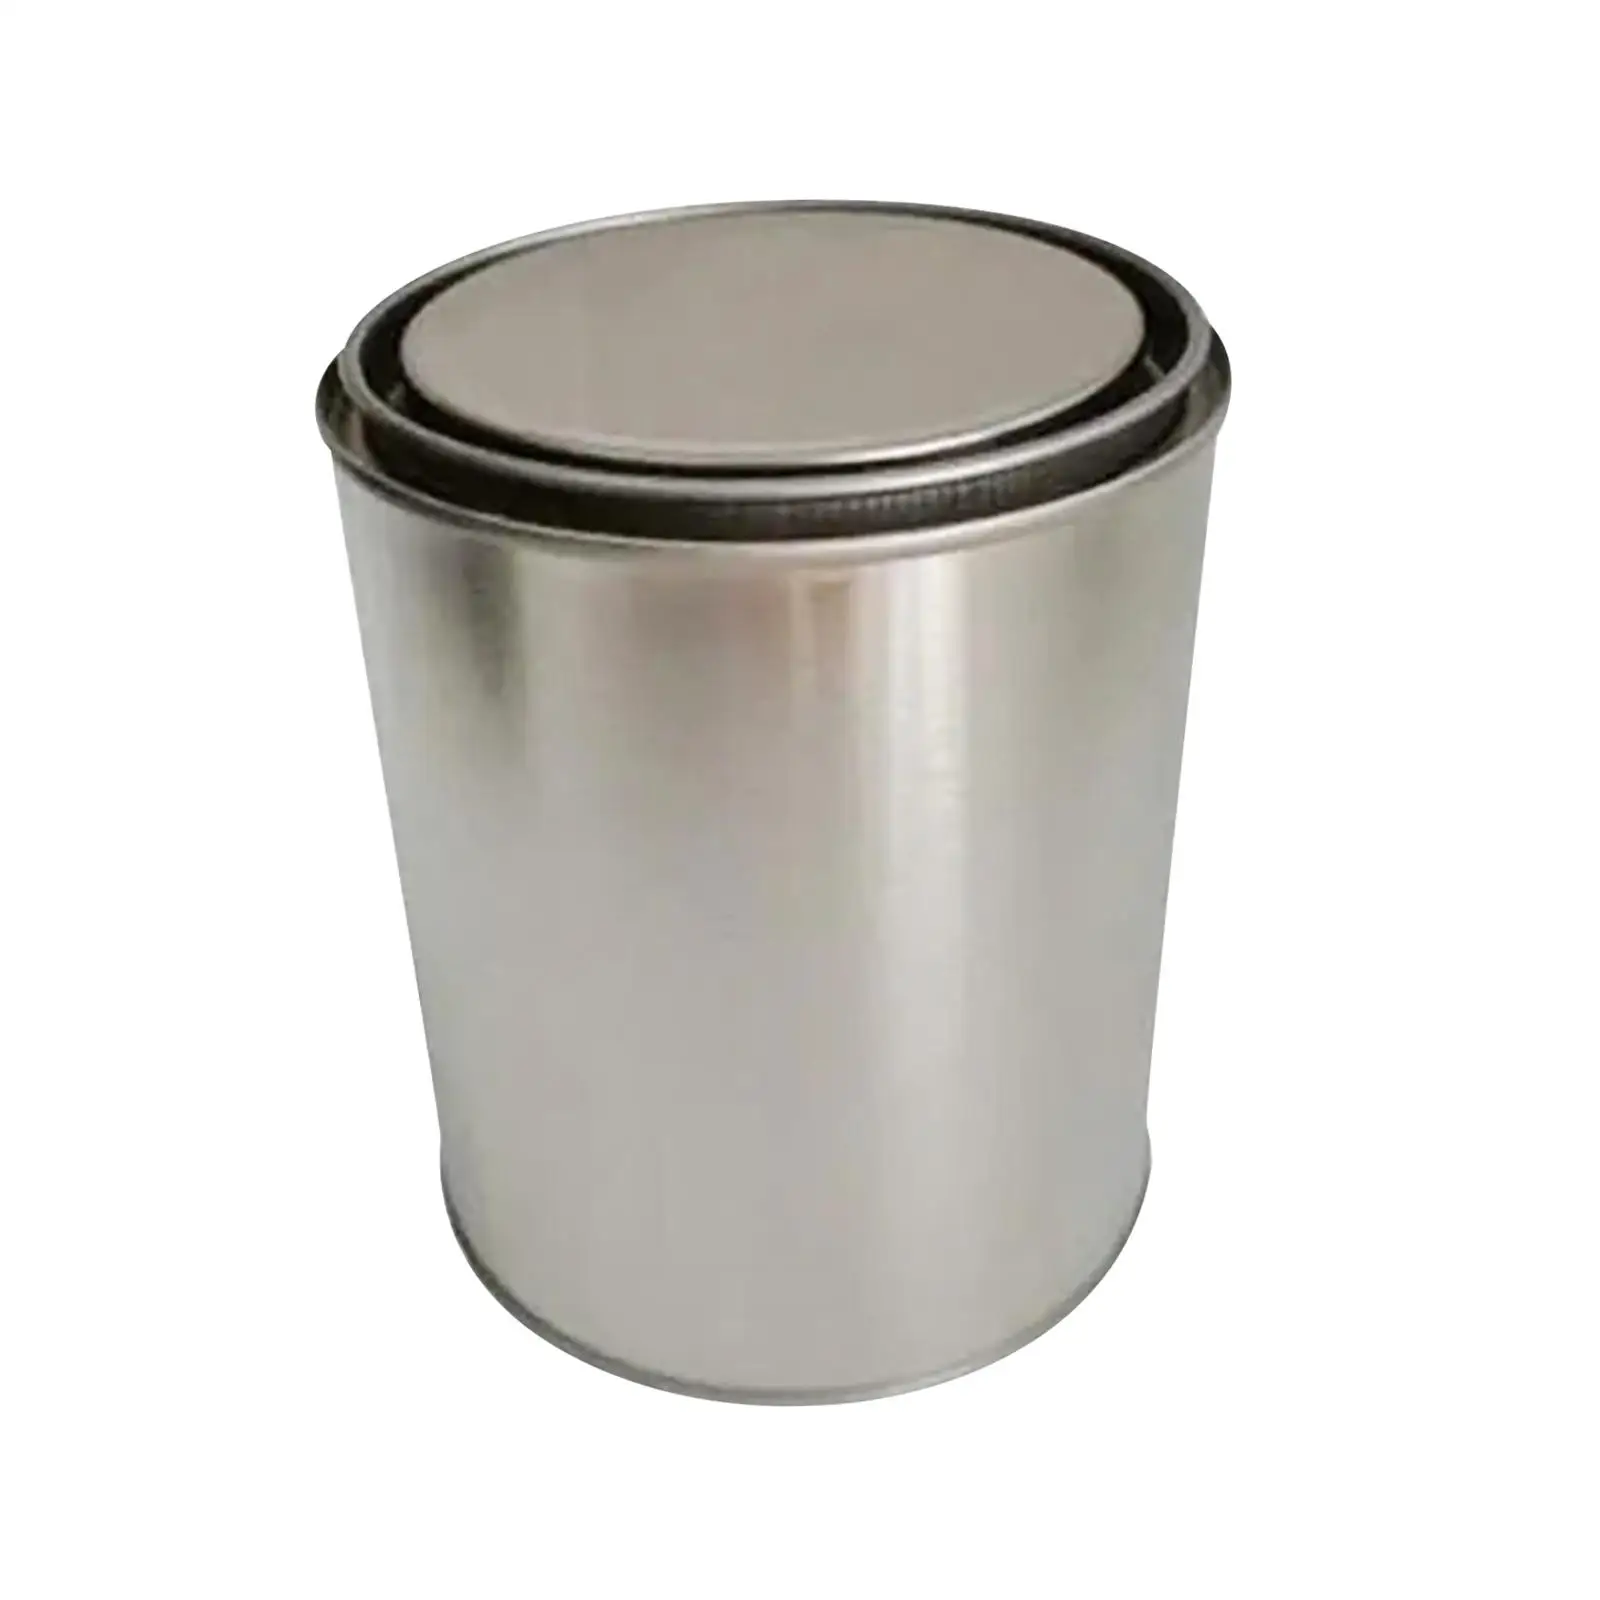 

Round Iron Lid Canister Easy to Use Convenient Large Round Opening Container